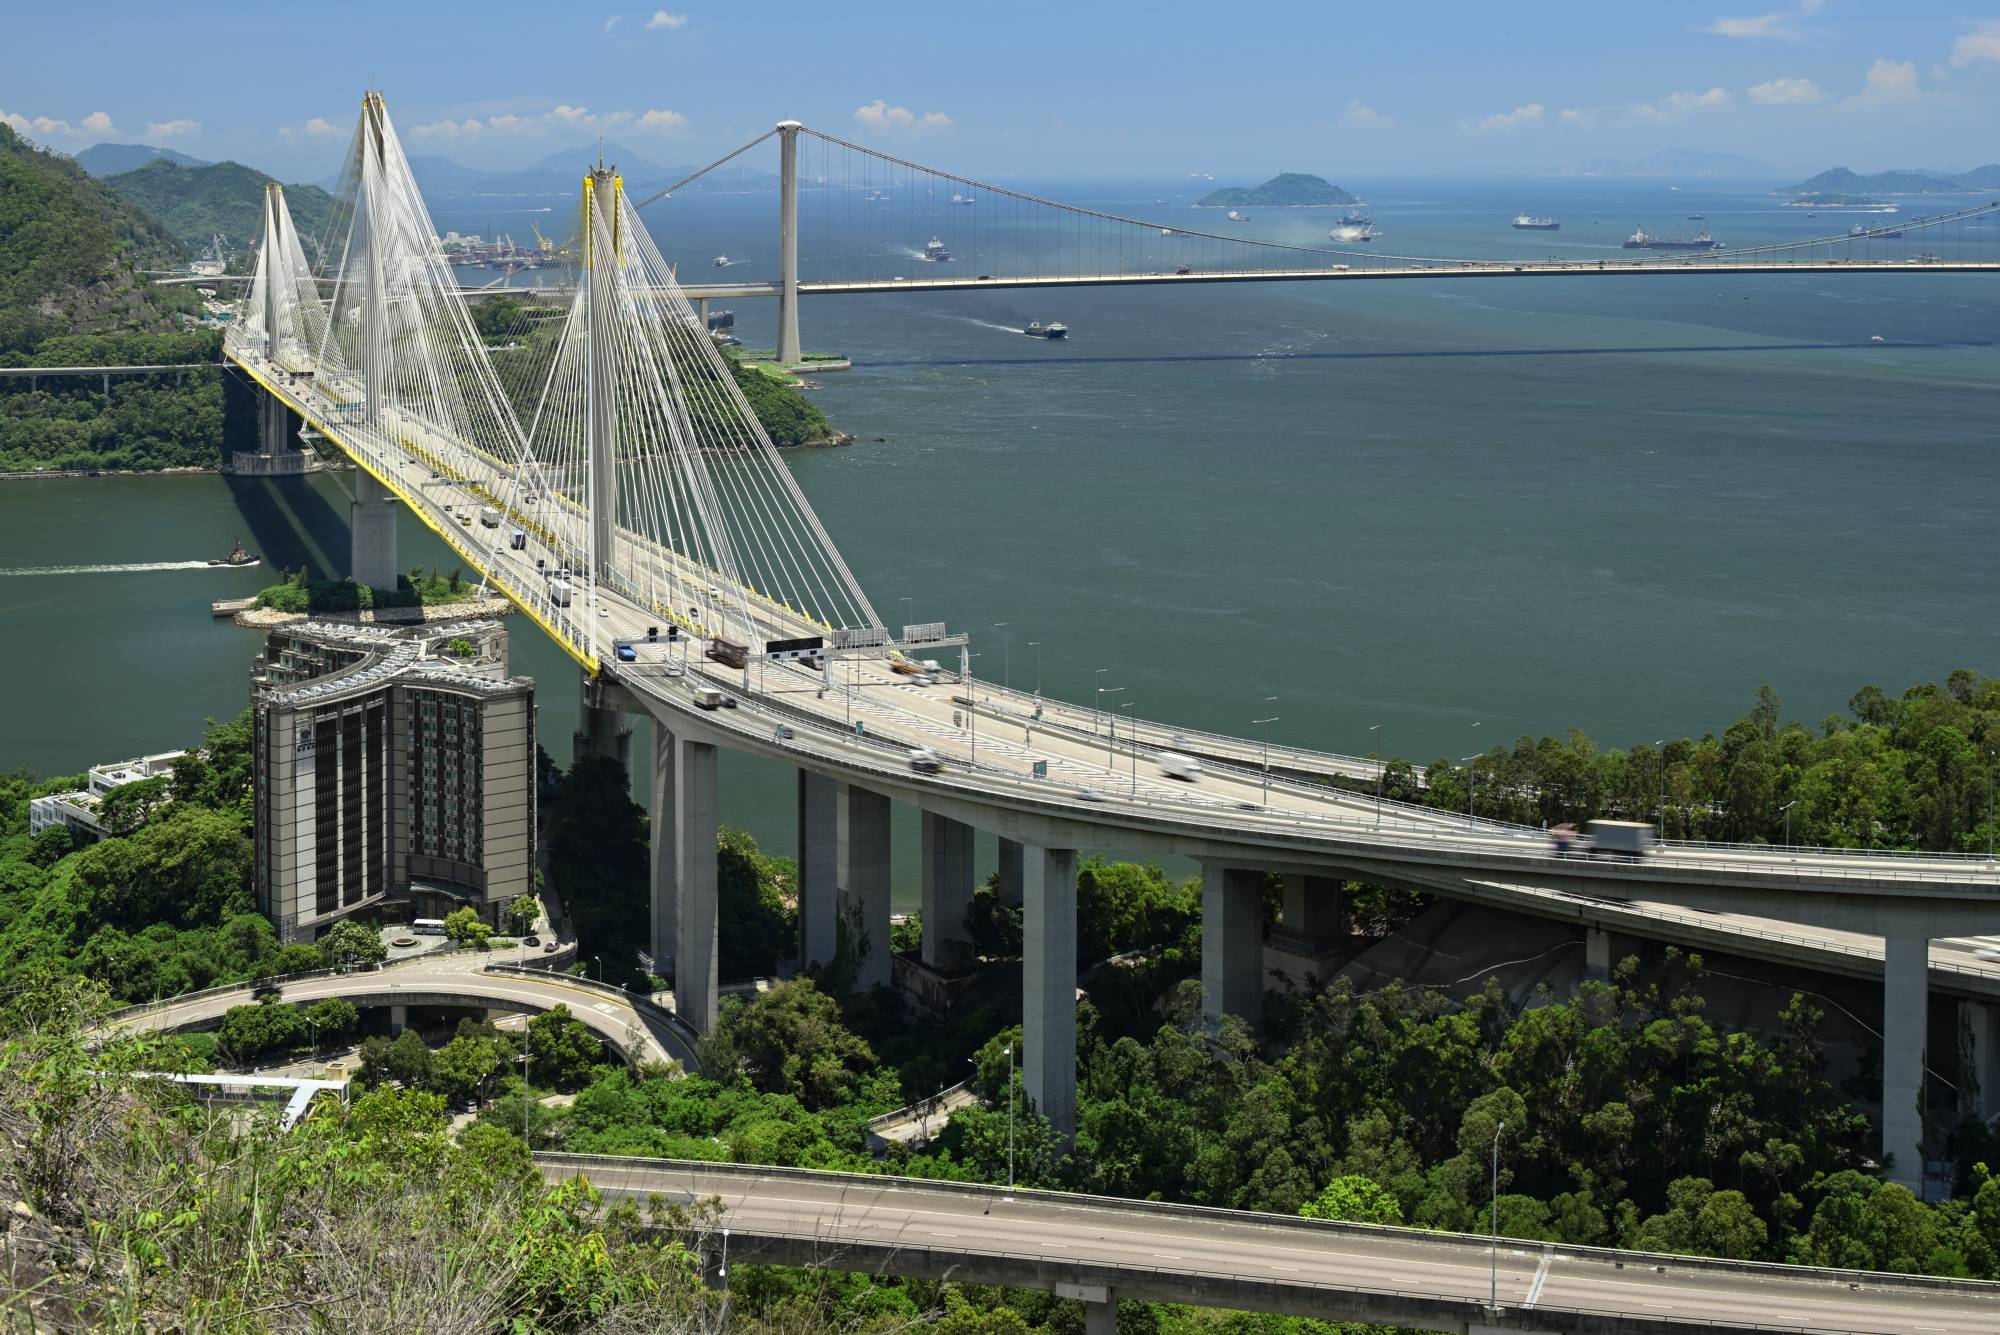 The construction of Ting Kau Bridge is one of Mr LAM Sai-hung’s most unforgettable works projects.